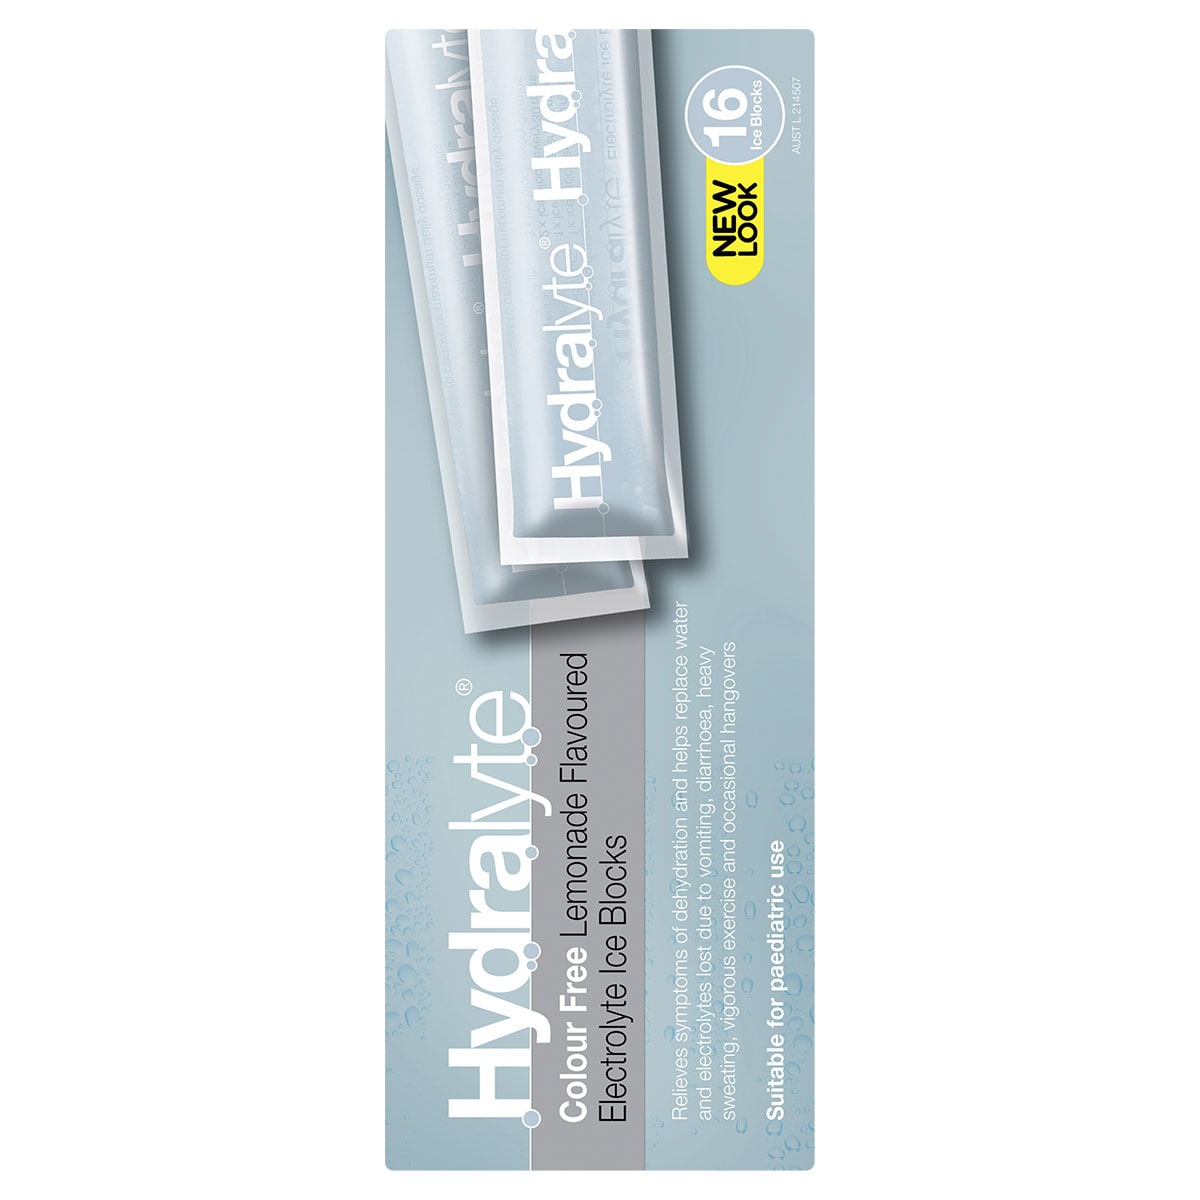 Hydralyte Rehydration Ice blocks Colour Free Lemonade Flavoured 16 Pack